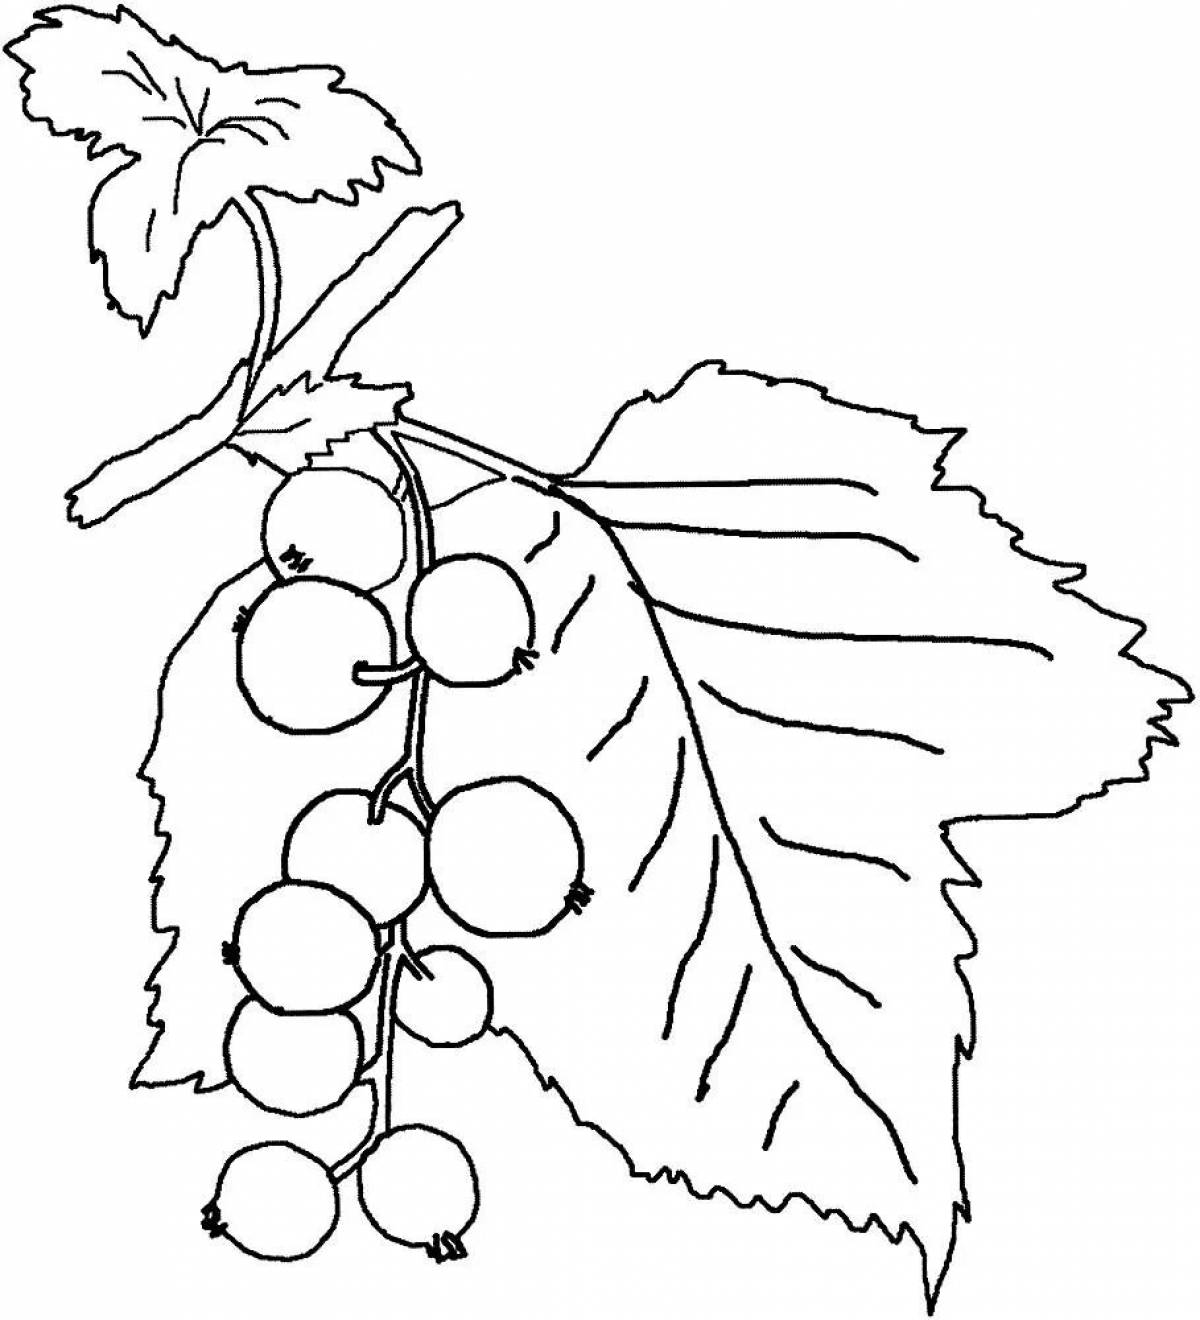 Blissful currant coloring for children